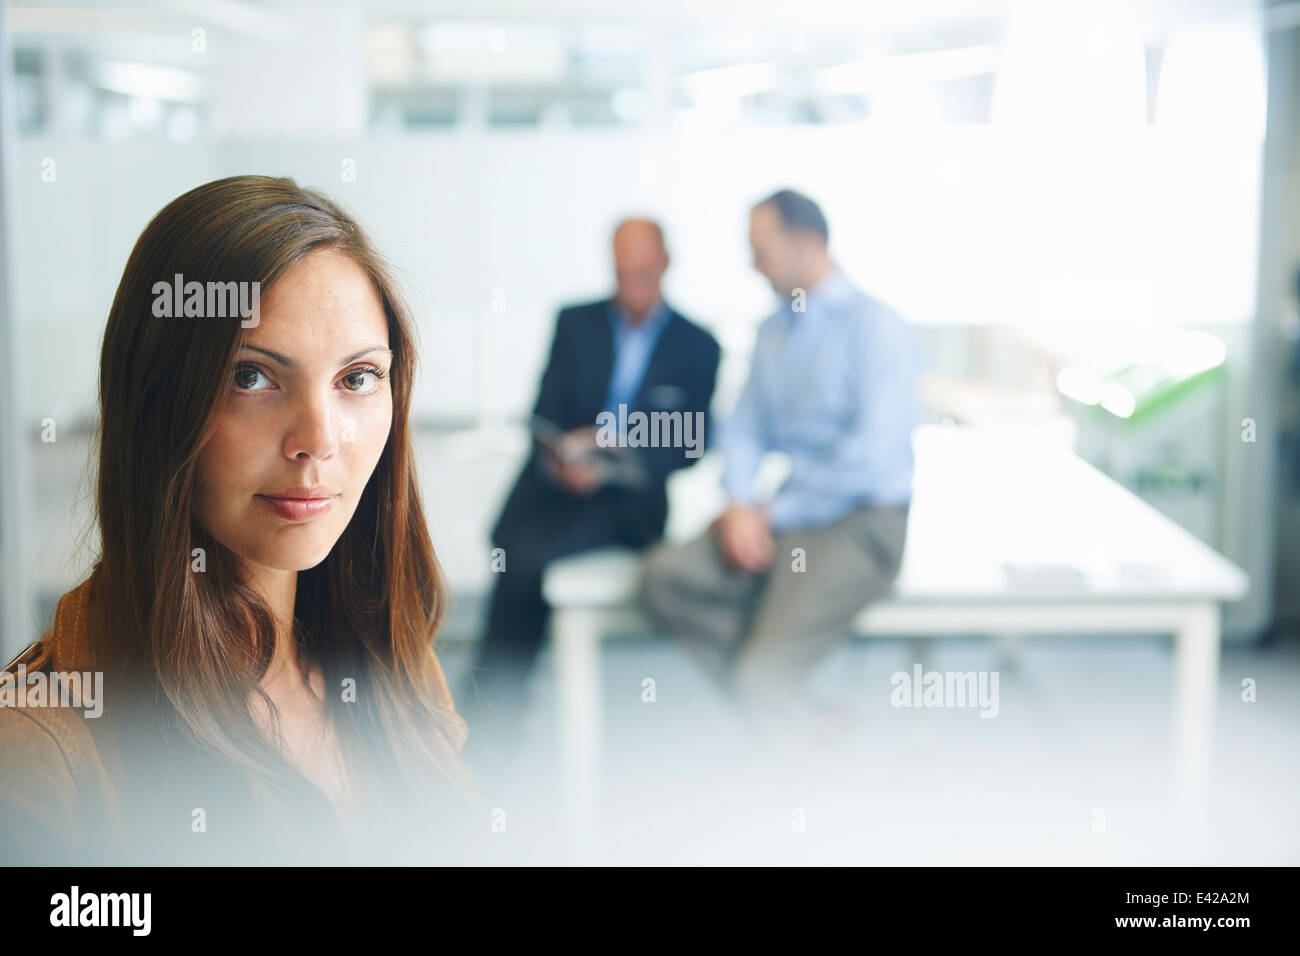 Woman posing for camera, businessmen in background Stock Photo